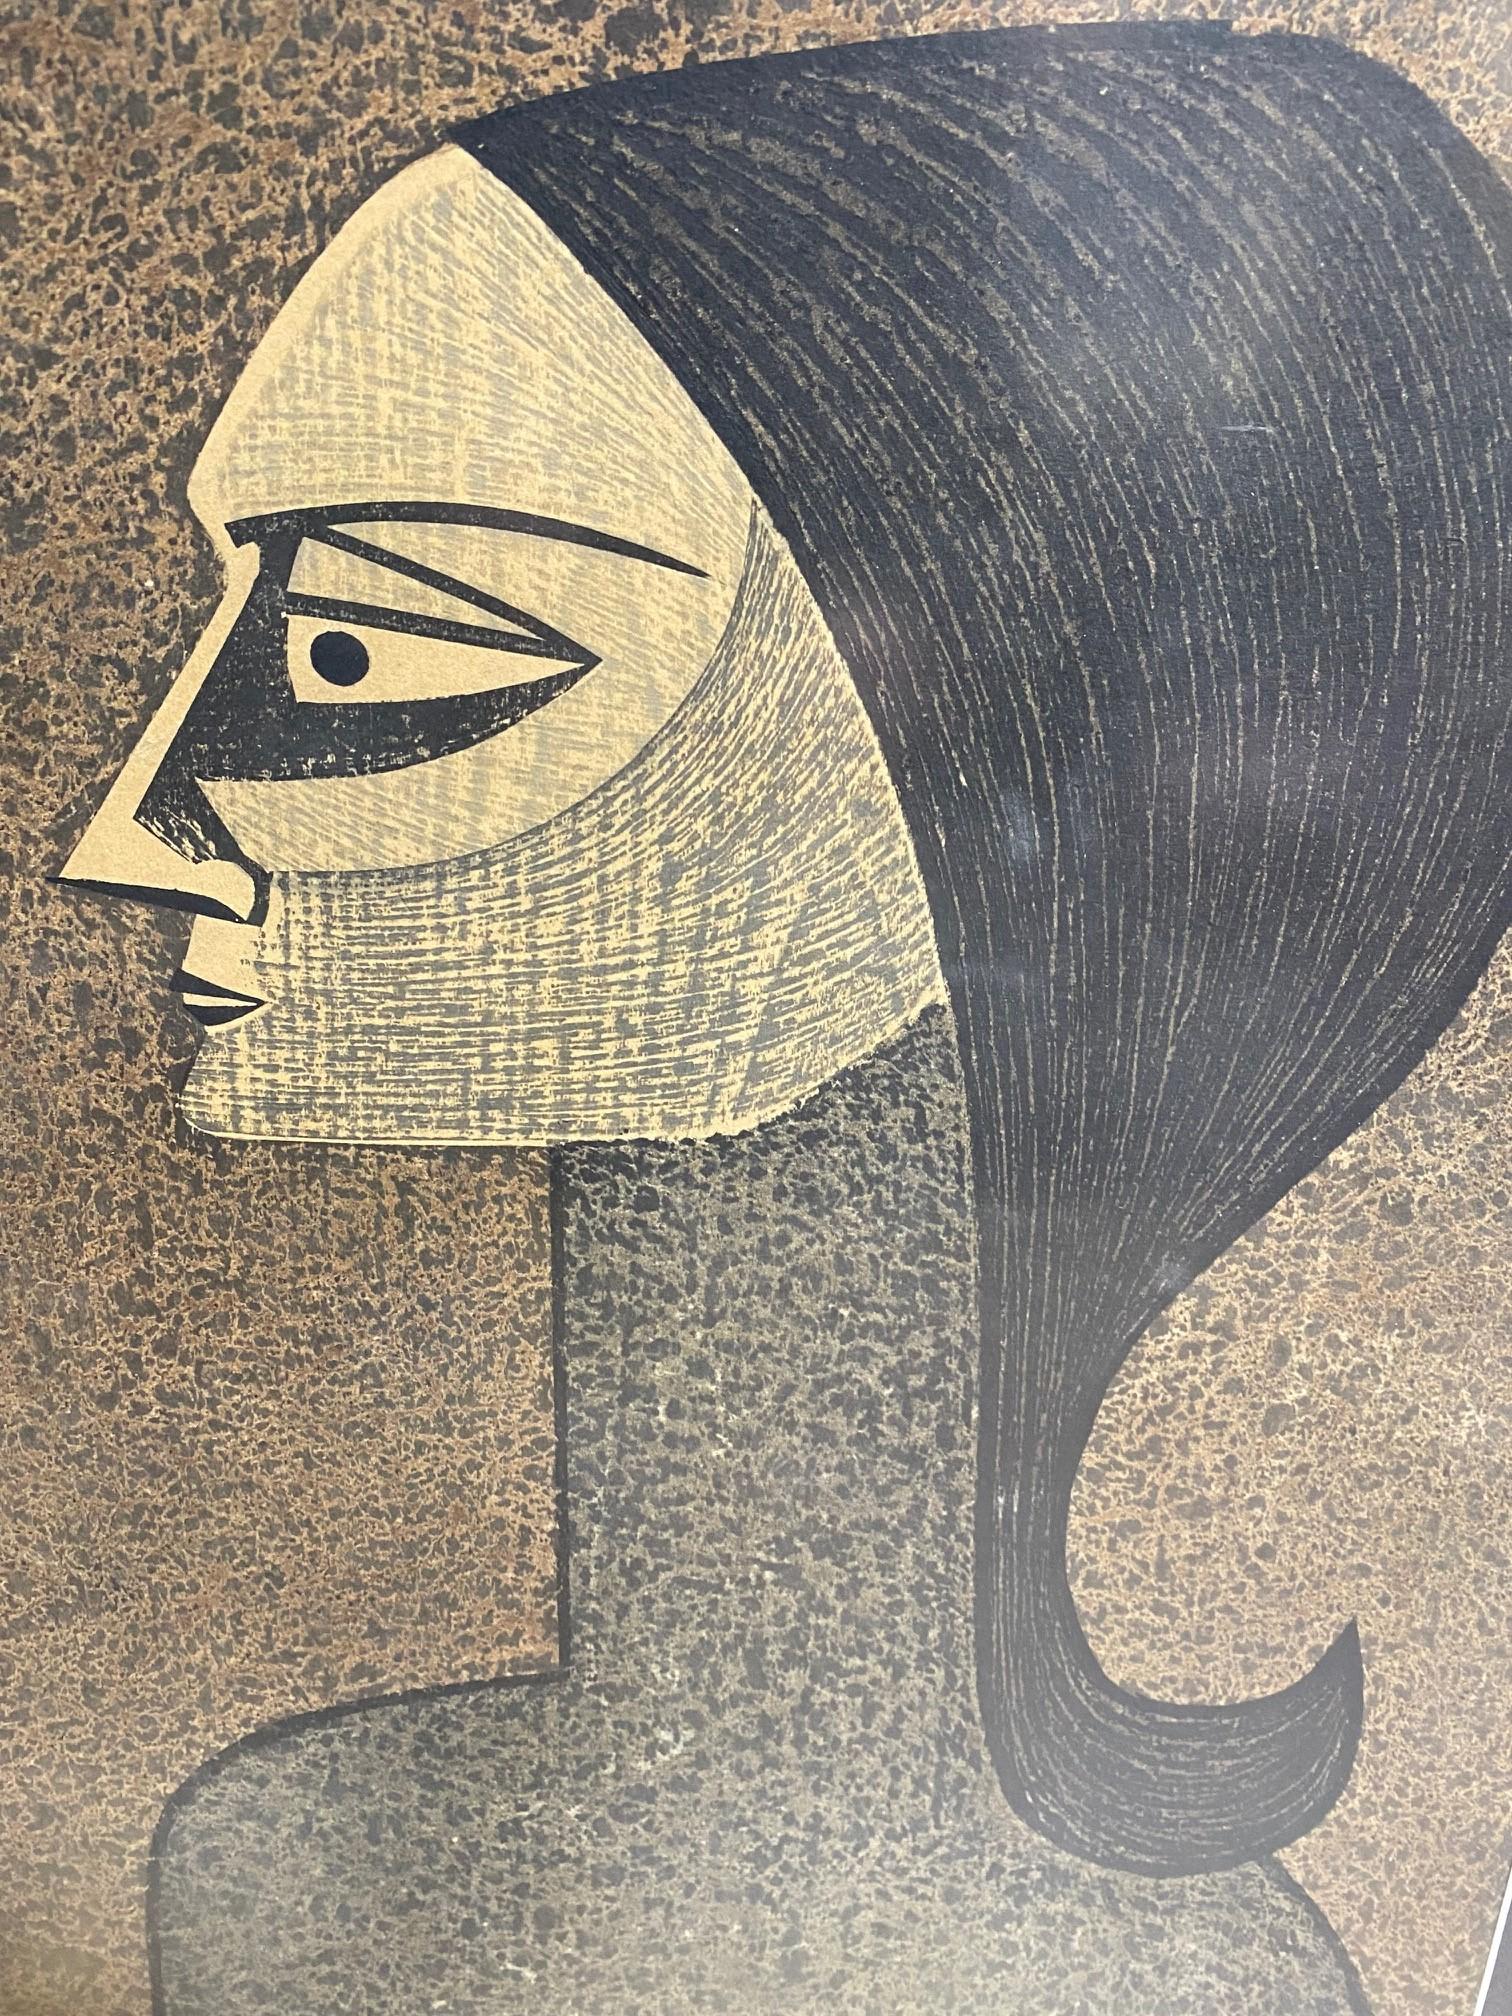 Kiyoshi Saito Signed Limited Edition Japanese Woodblock Print Steady Gaze Paris In Good Condition For Sale In Studio City, CA